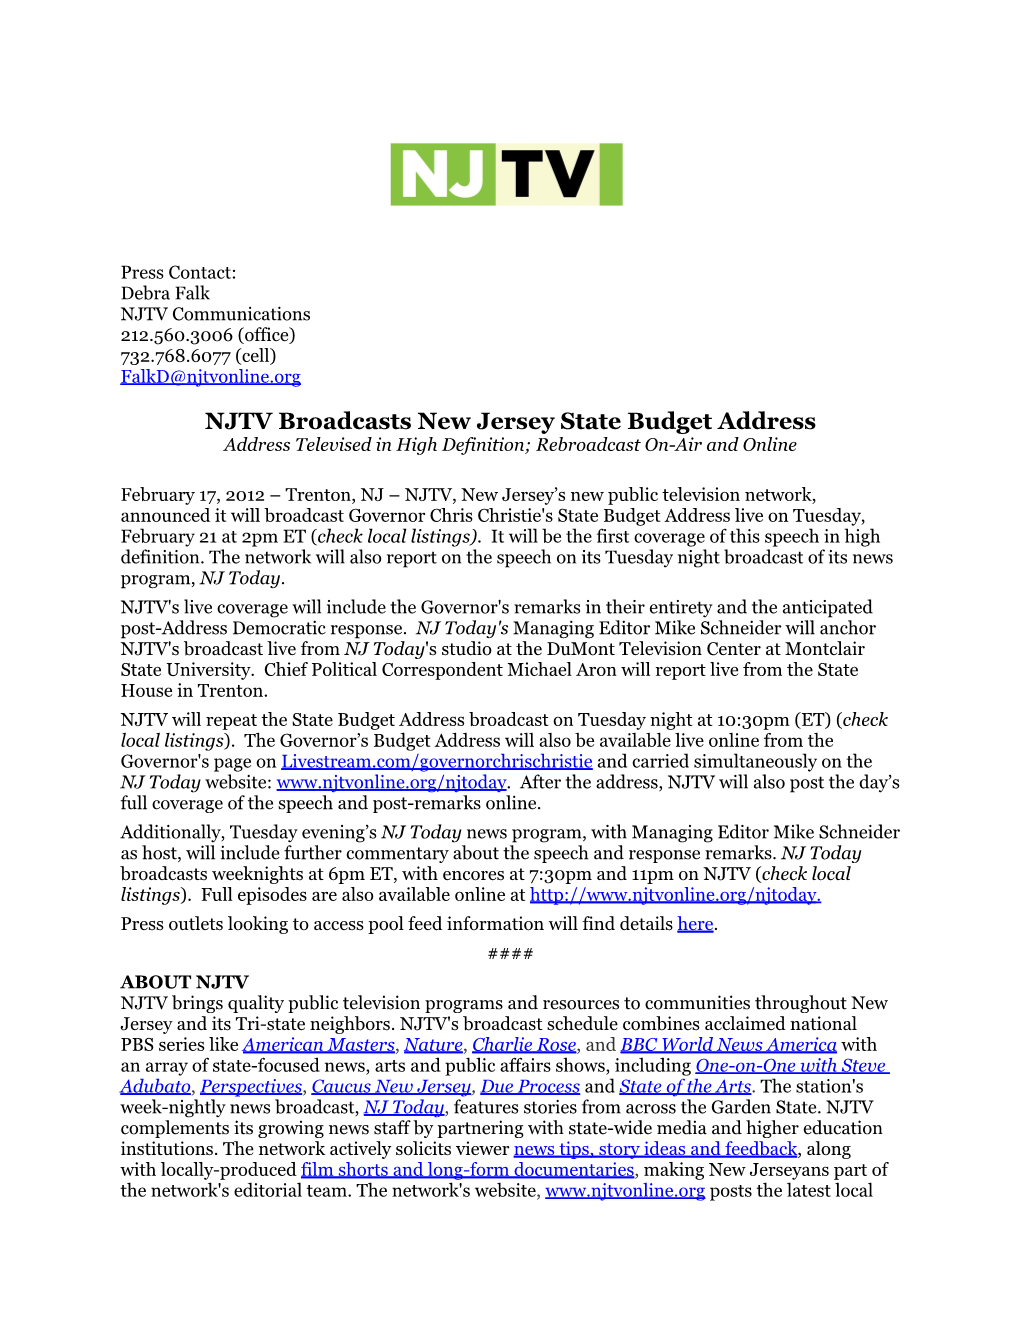 NJTV Broadcasts New Jersey State Budget Address Address Televised in High Definition; Rebroadcast On-Air and Online